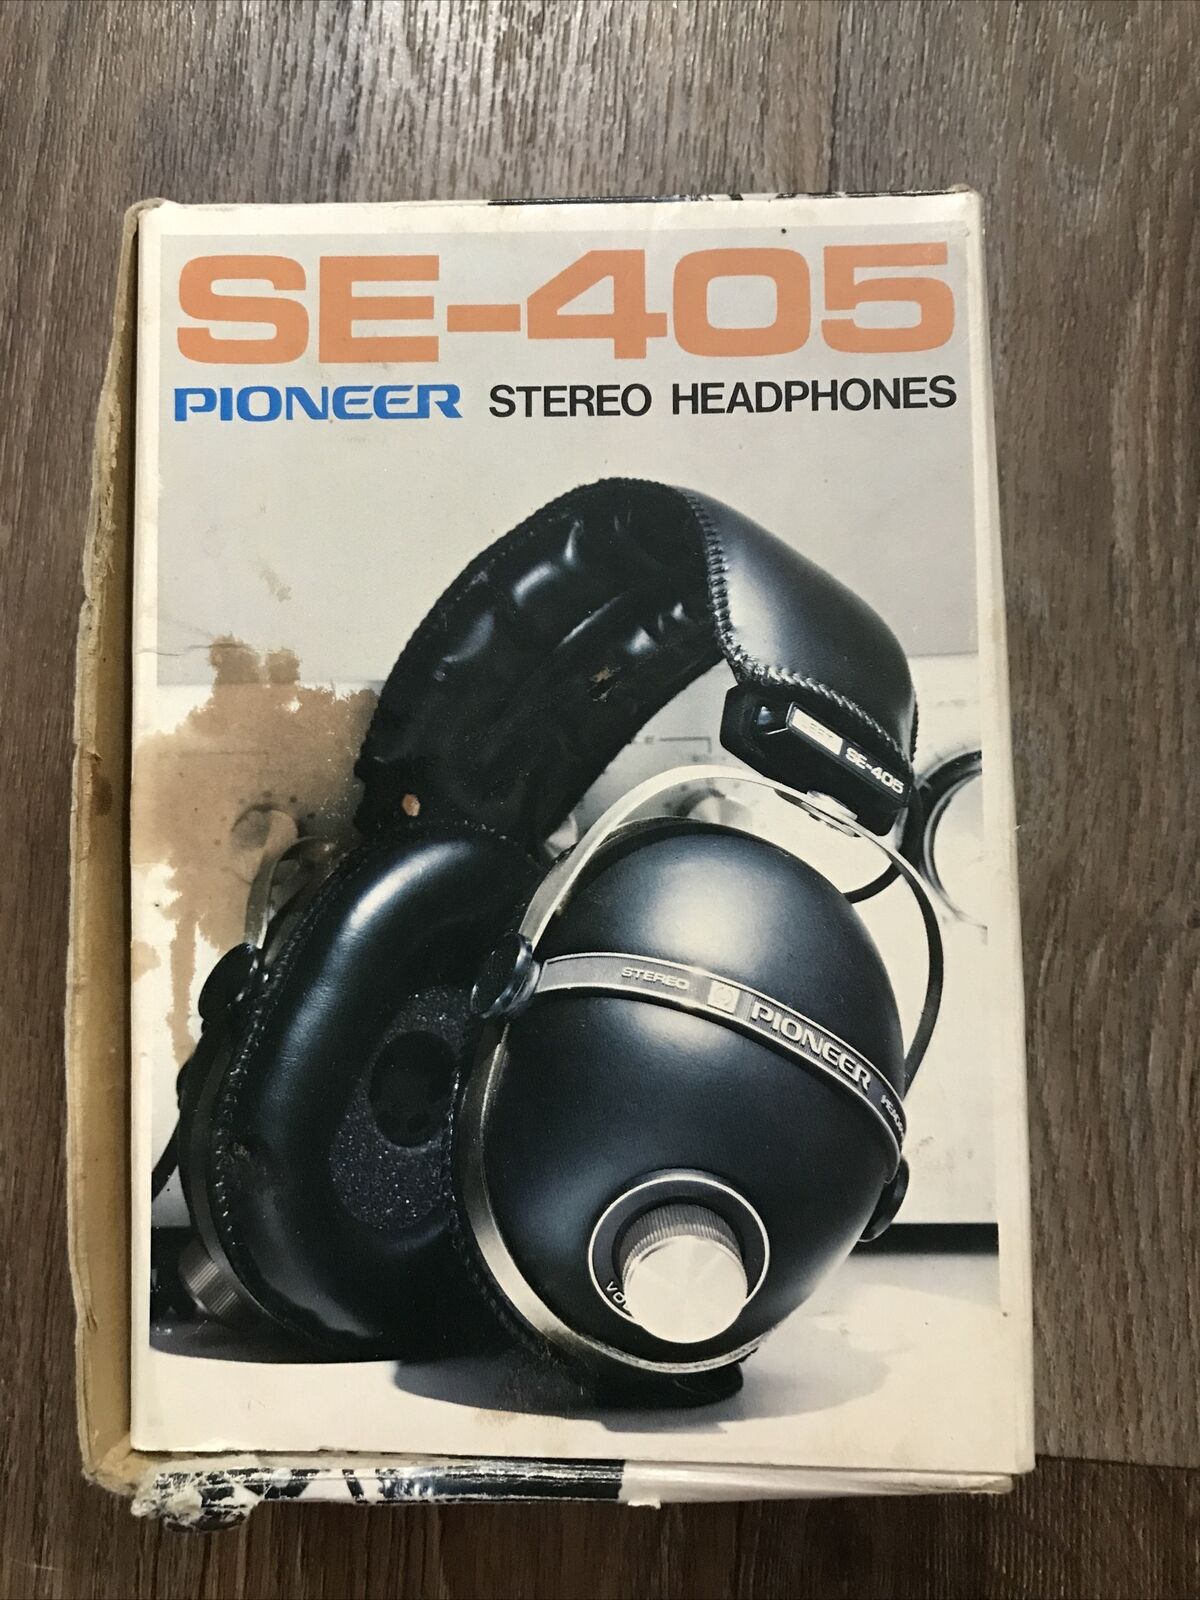 Vintage Pioneer Se-405 Stereo Headphones Box Only!!! Replacement Box!